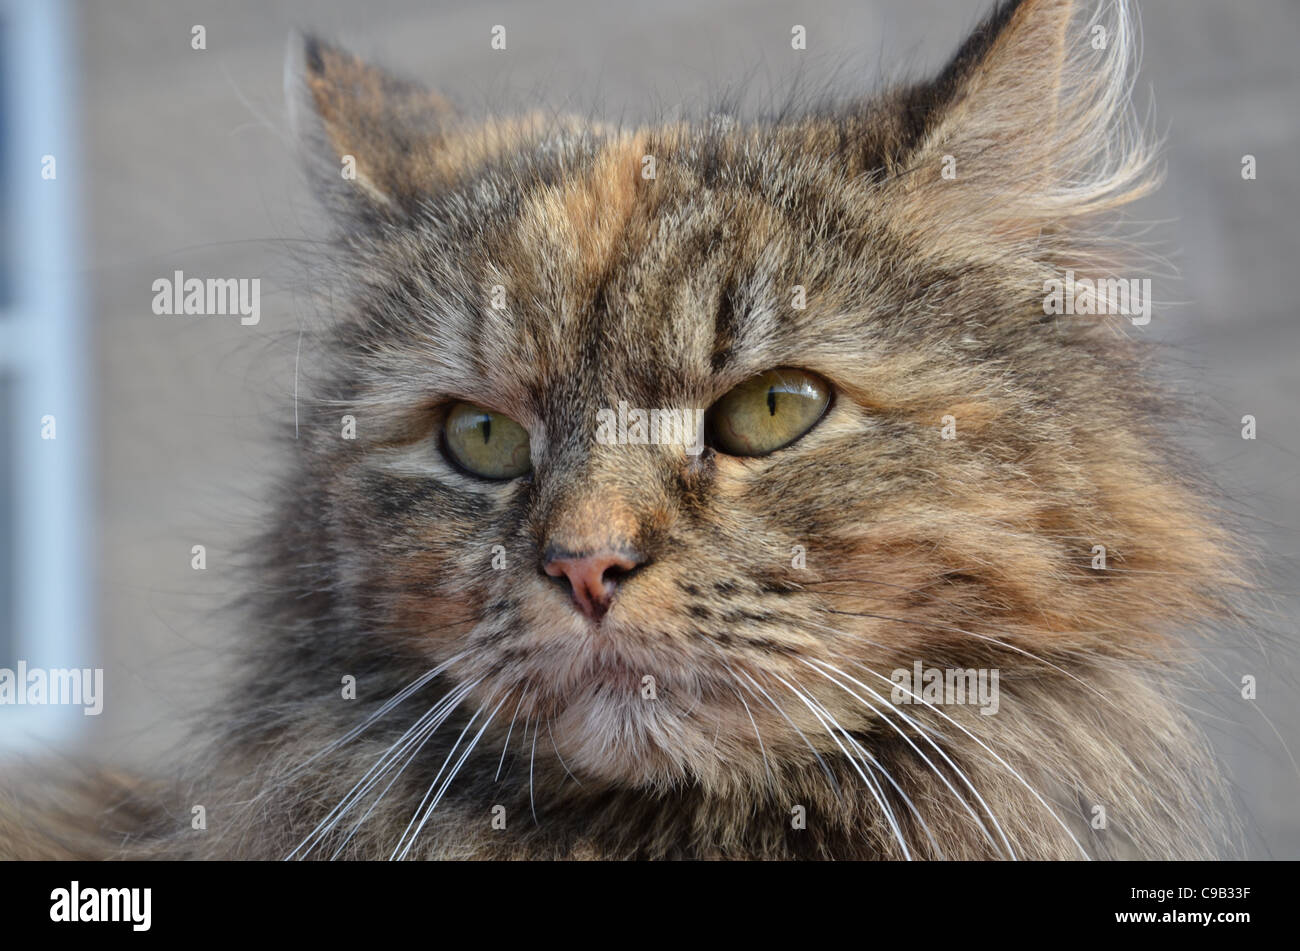 Face of cat, like a lynx Stock Photo